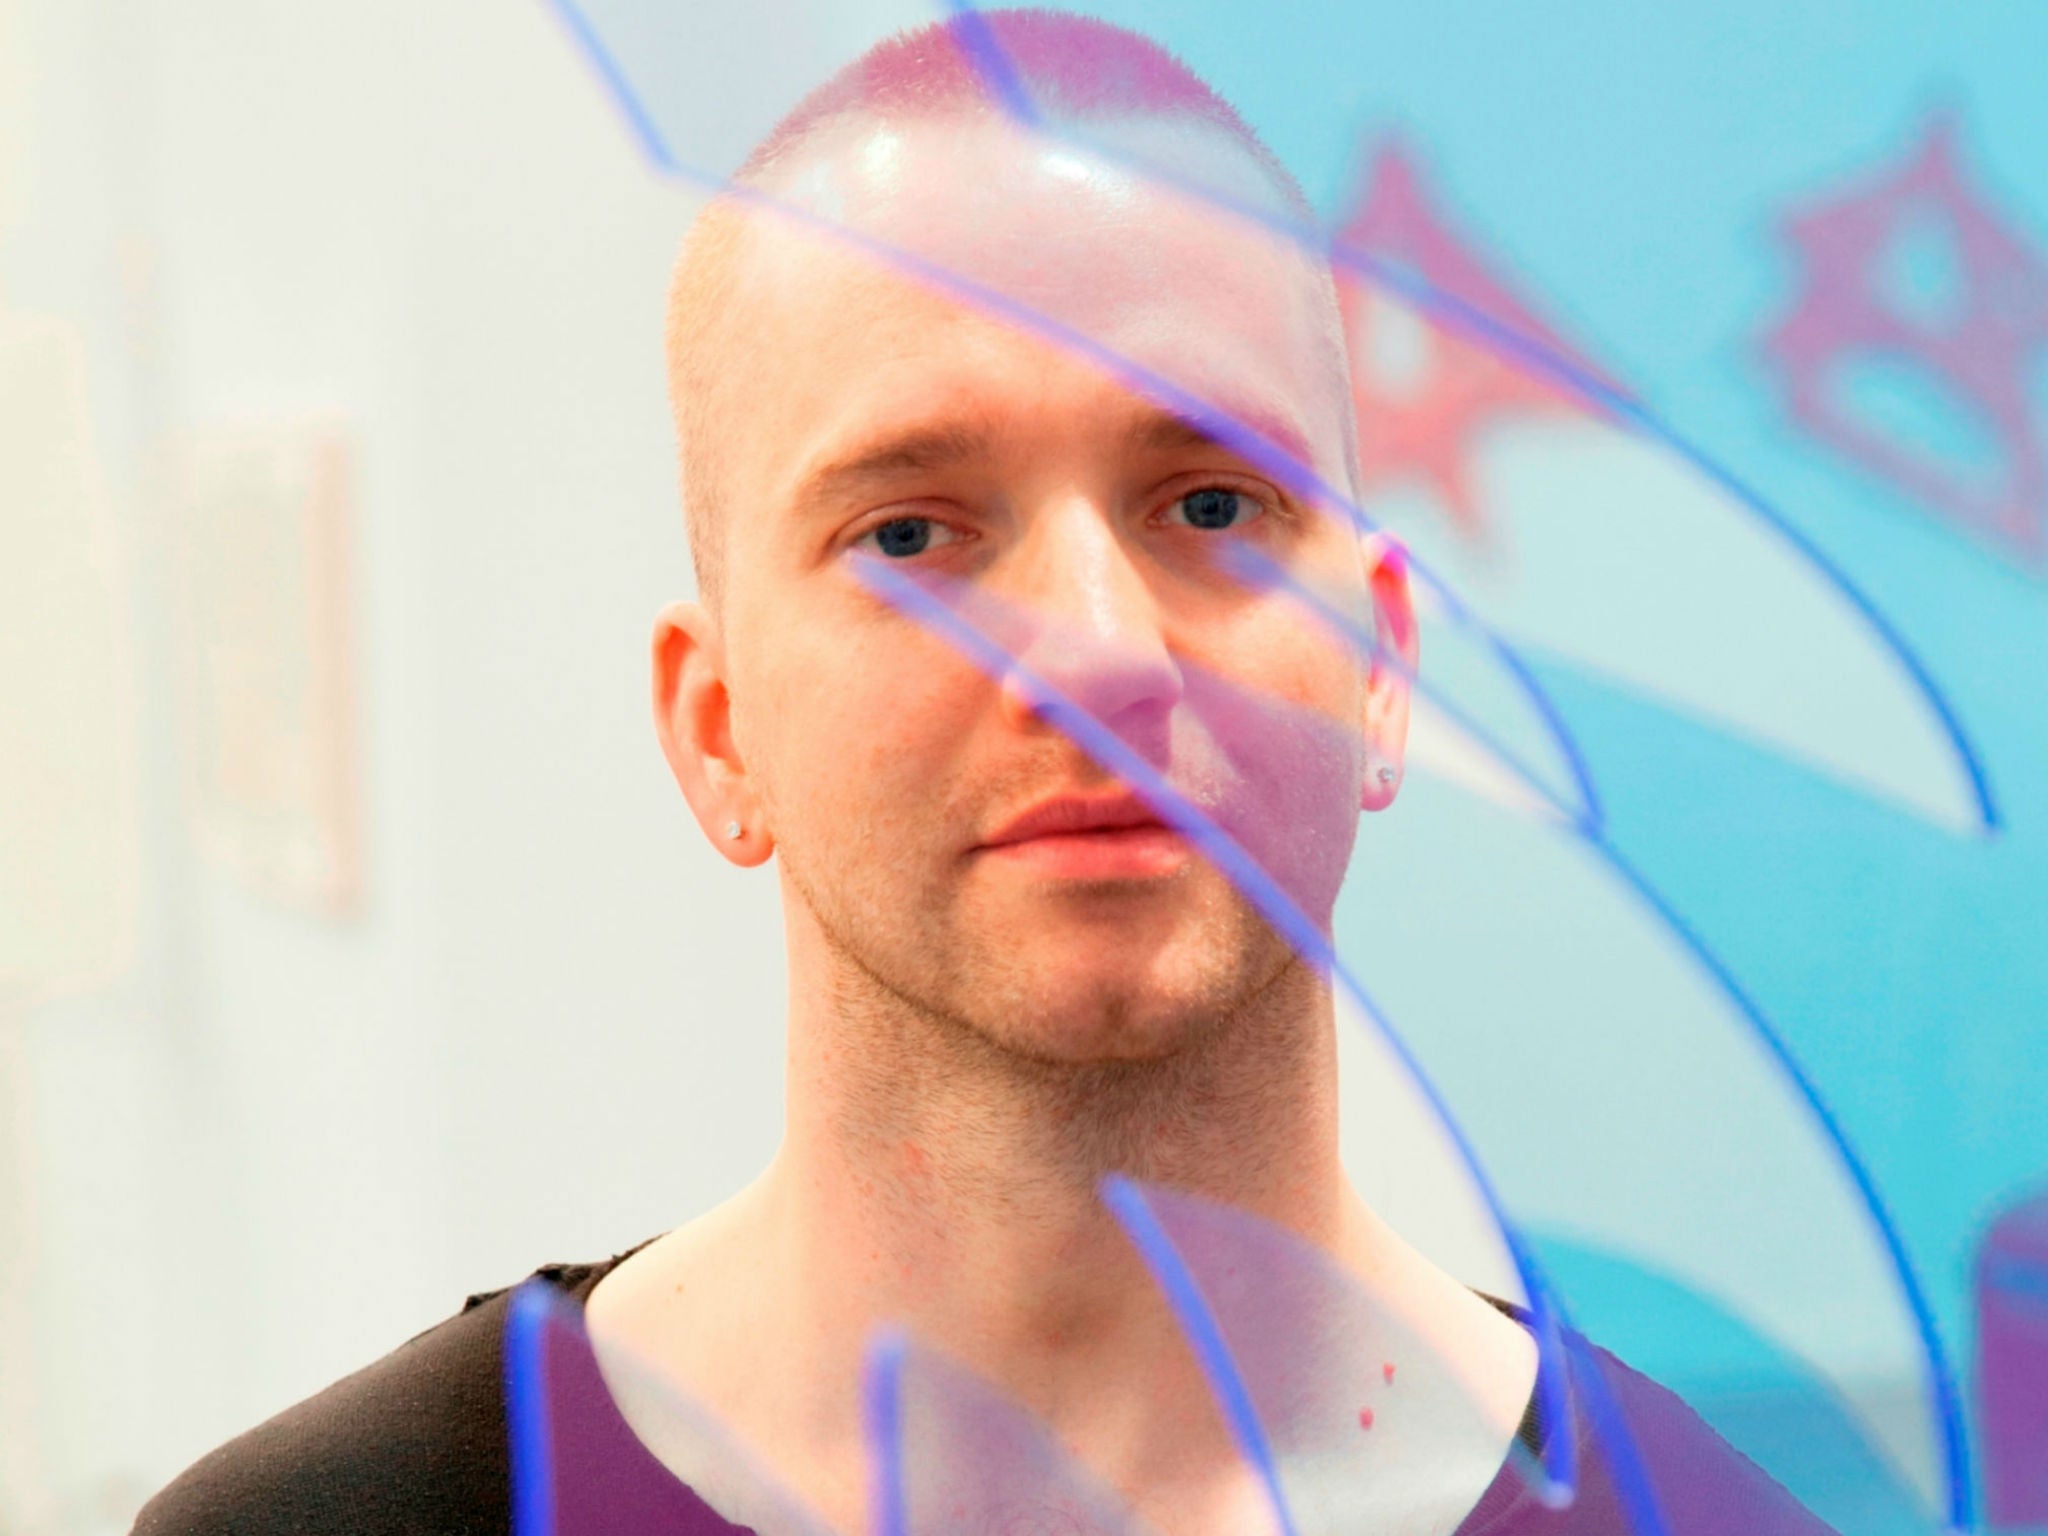 Eddie Peake is known for using the naked body in his art projects